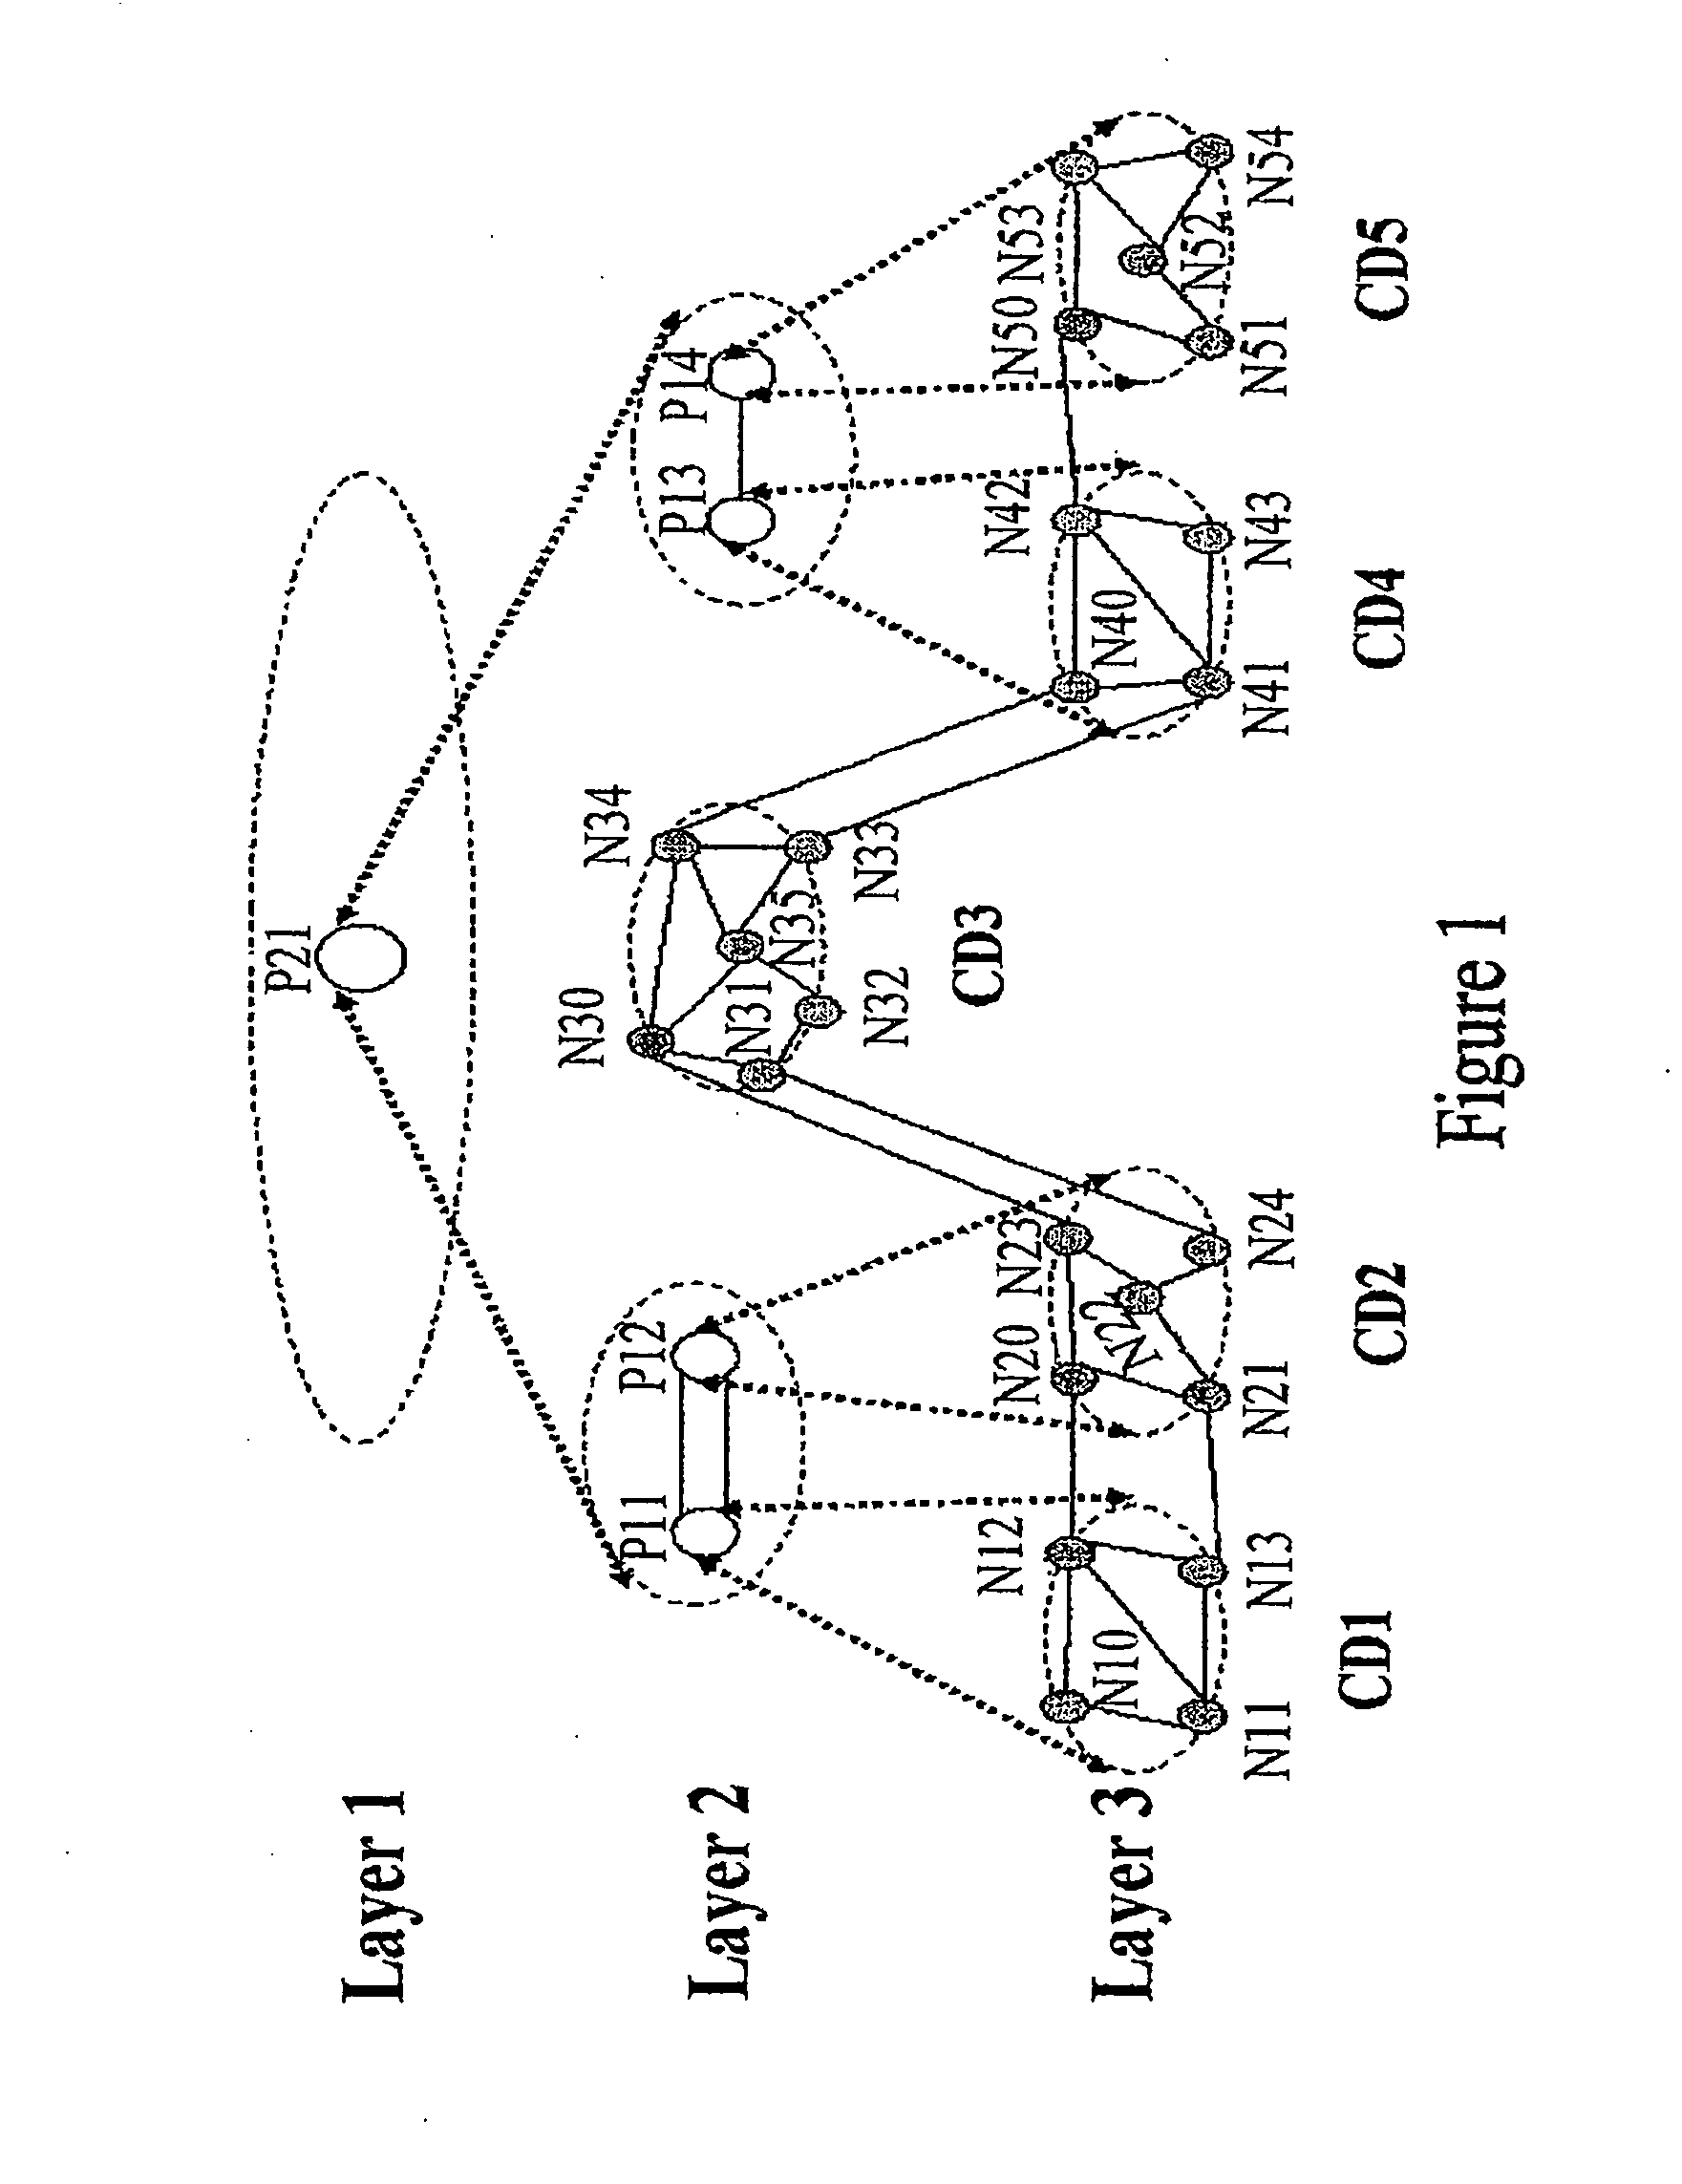 Method and system for multi-domain route computation